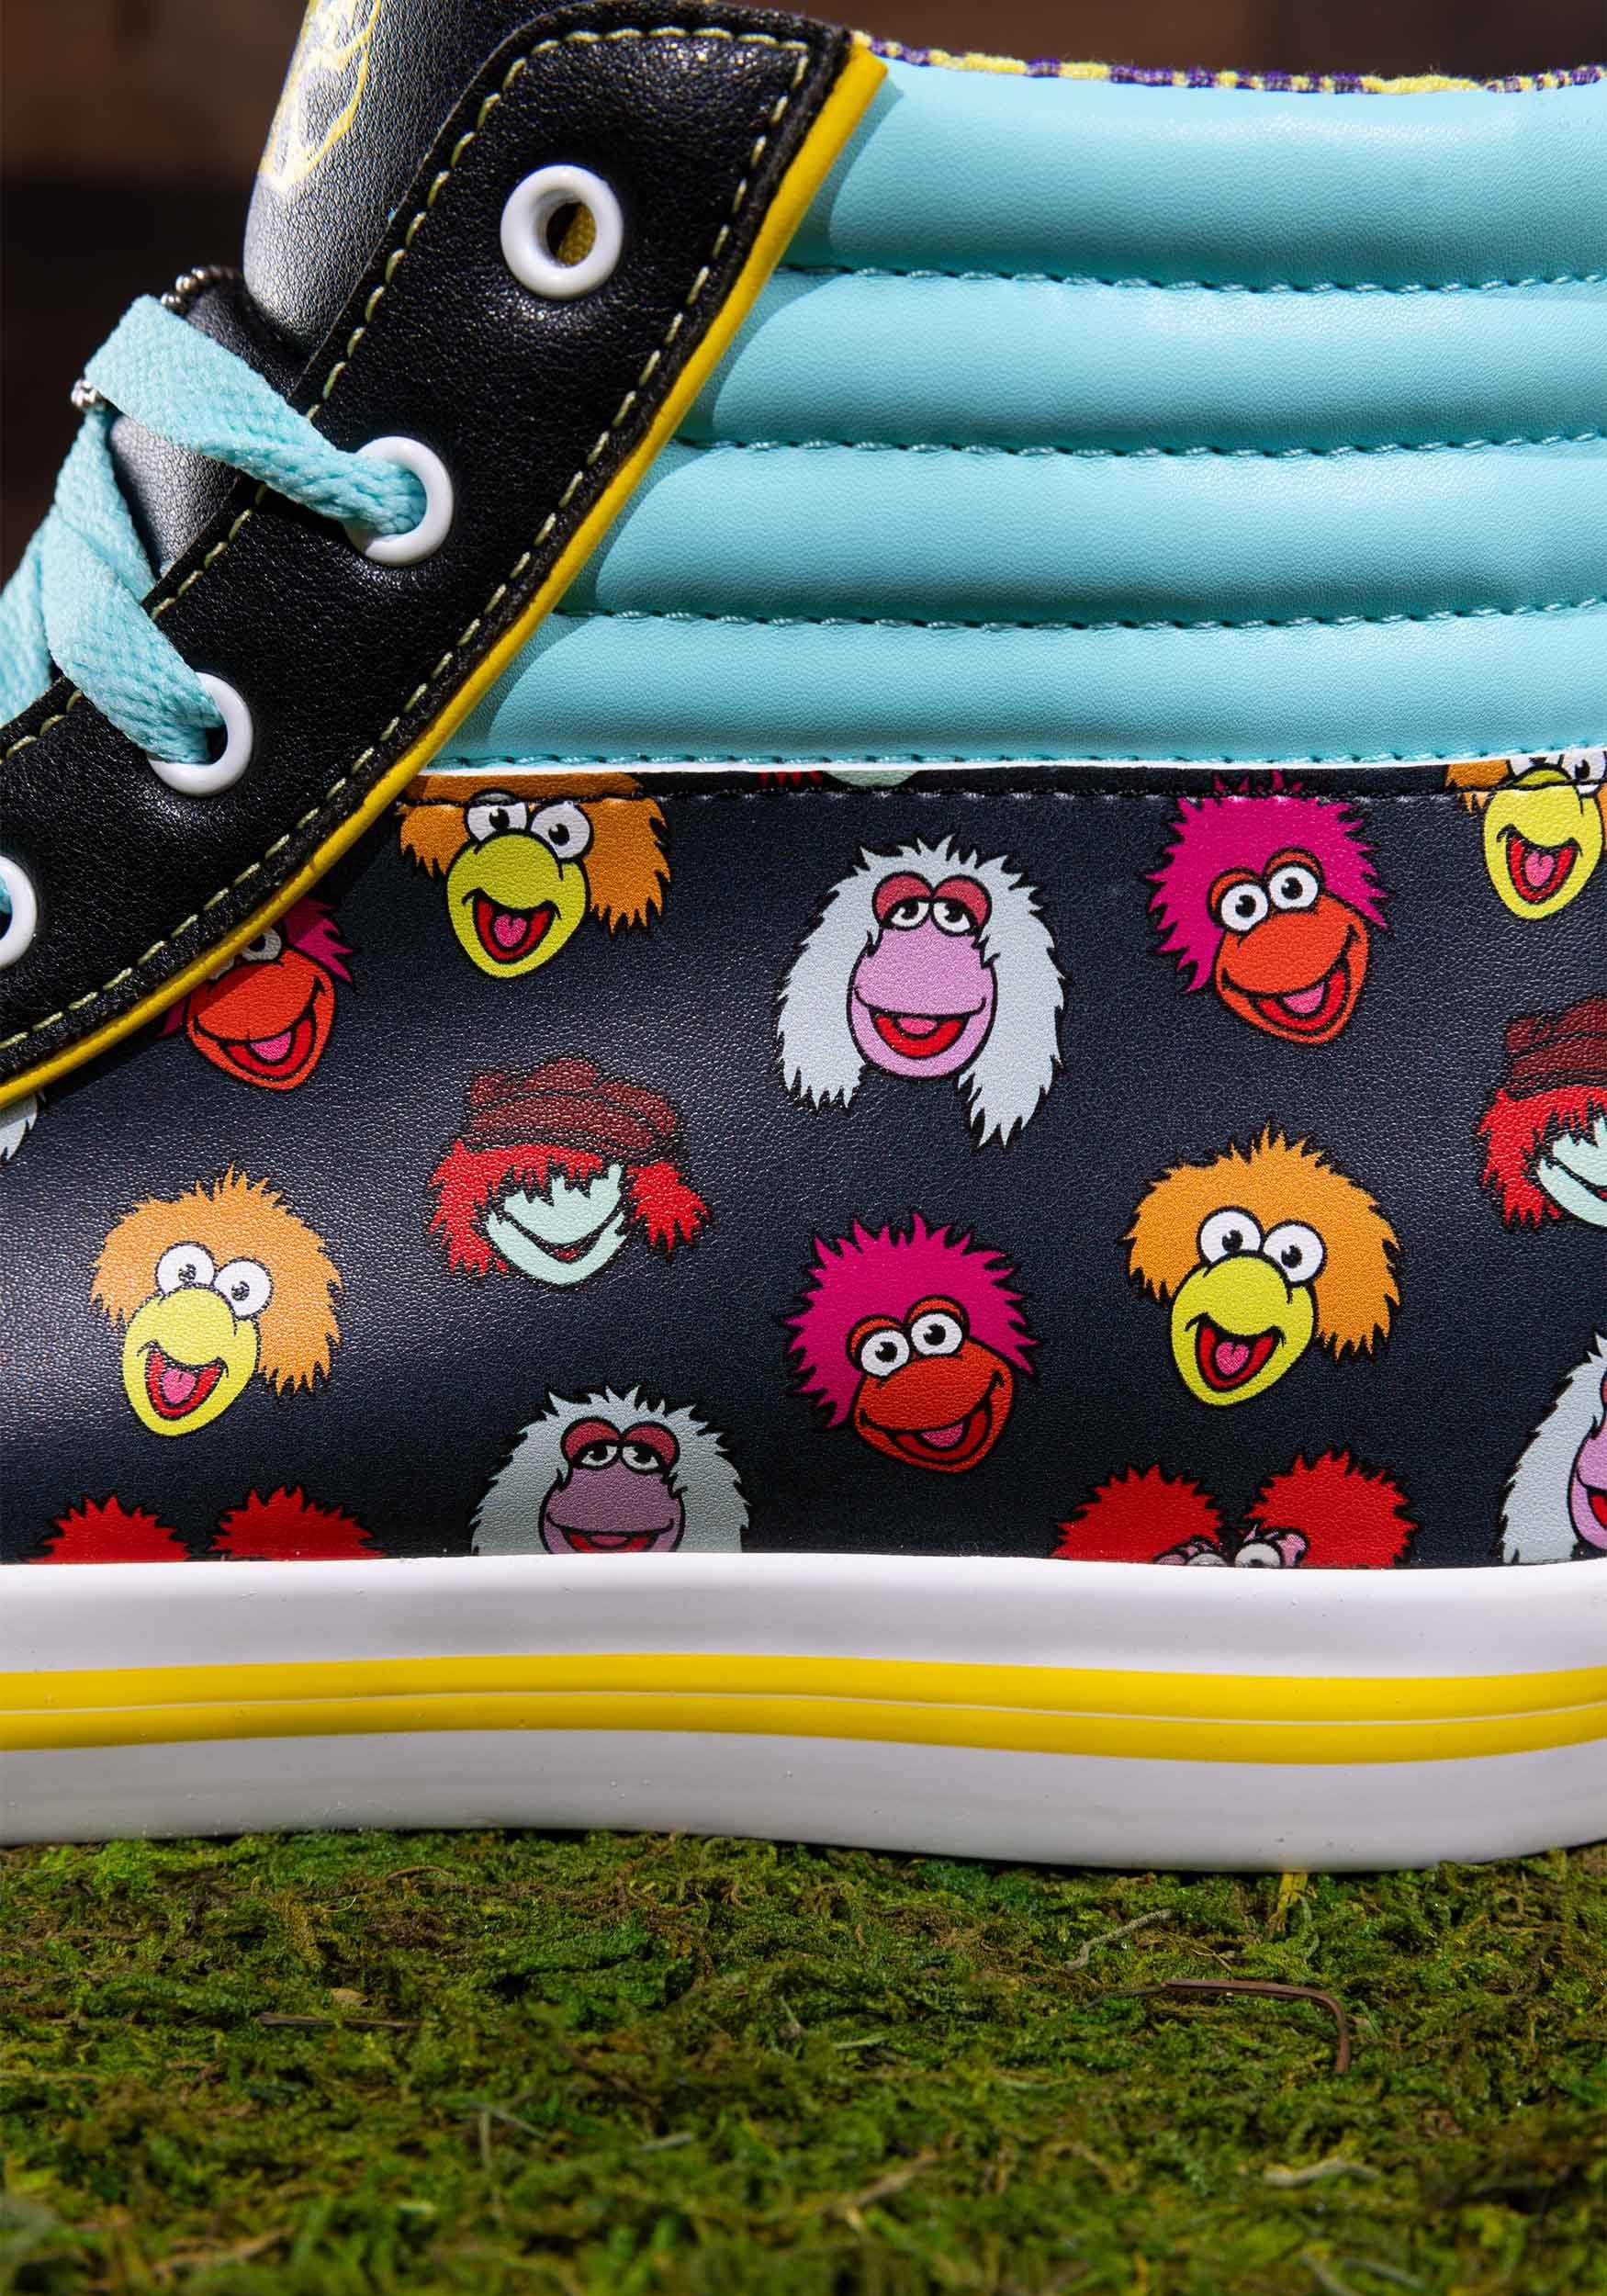 Fraggle Rock Adult Shoes , Exclusive Sneakers